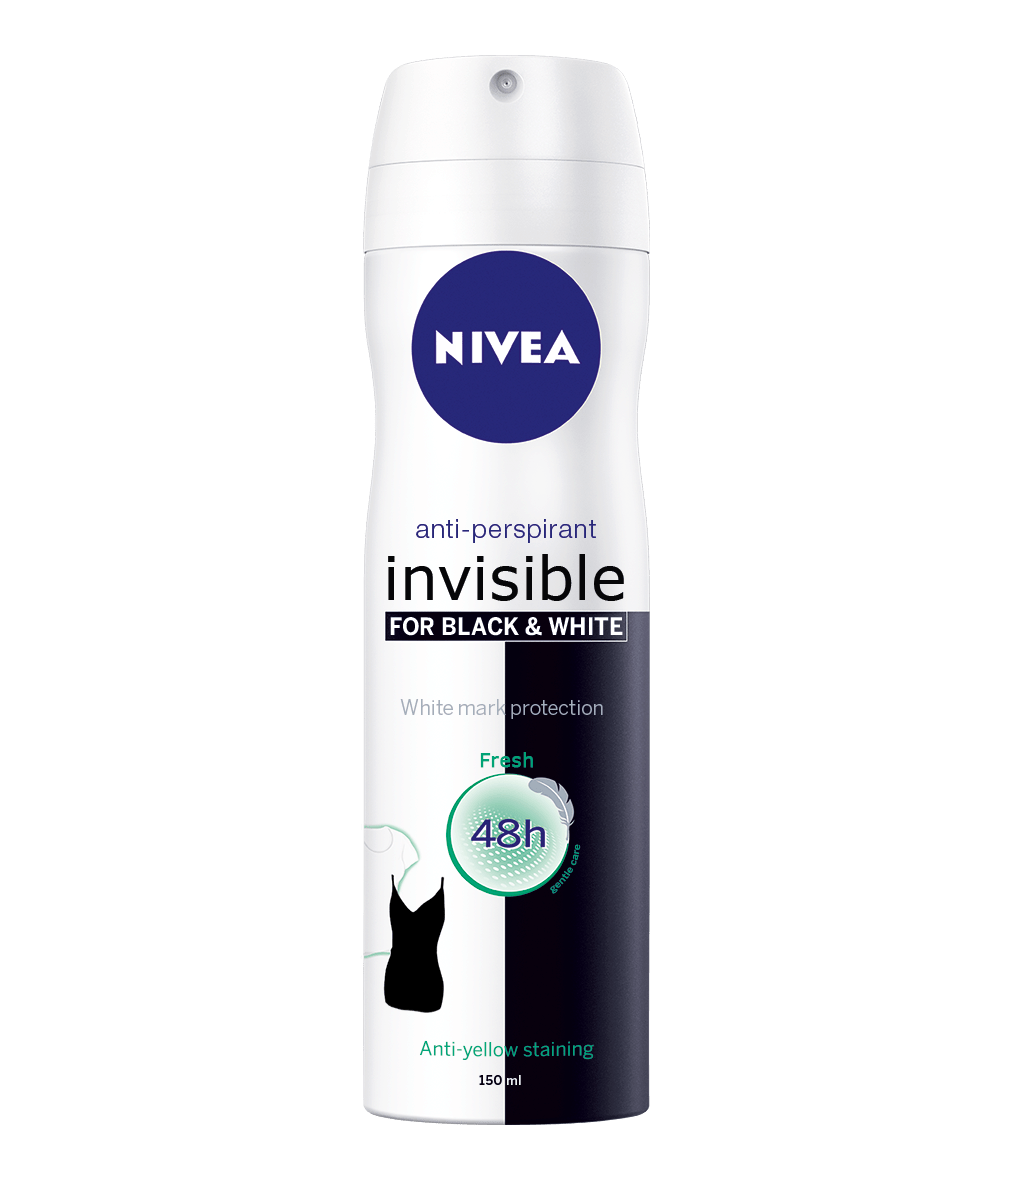 maïs Allergie Raad Invisible for Black & White Clean - NIVEA